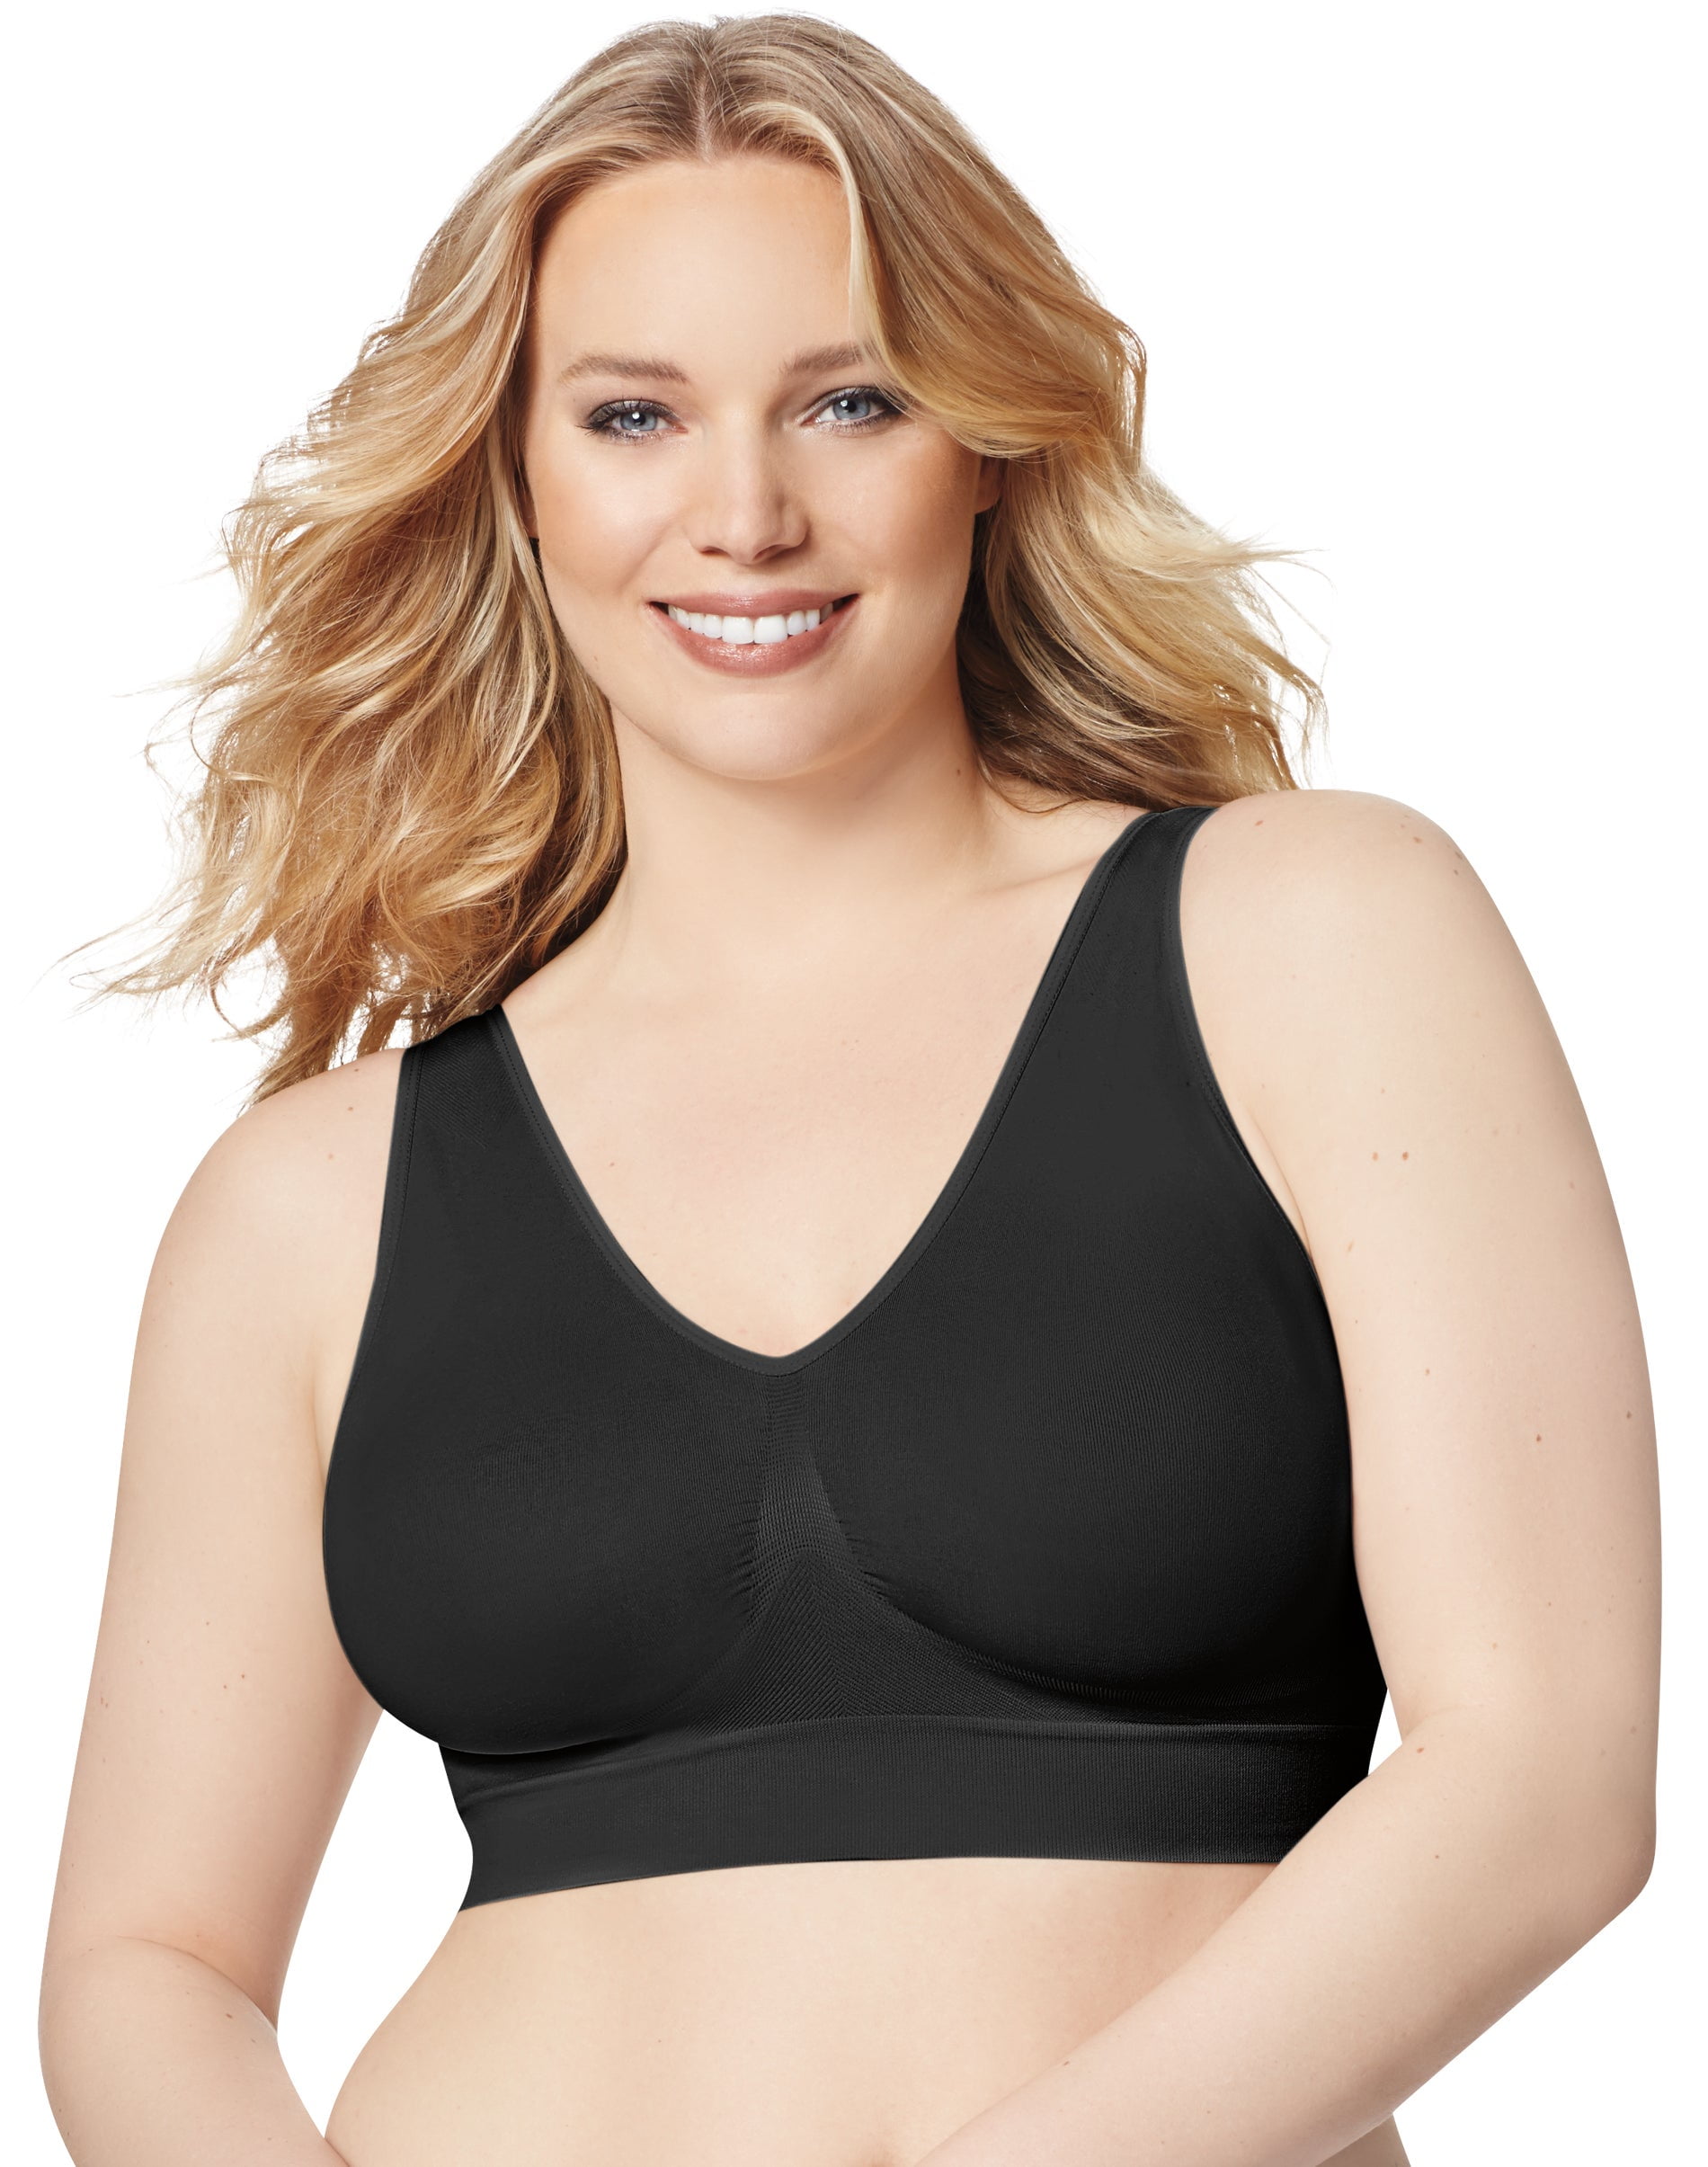 Hanes Just My Size Women's Pure Comfort Seamless Bralette (Plus